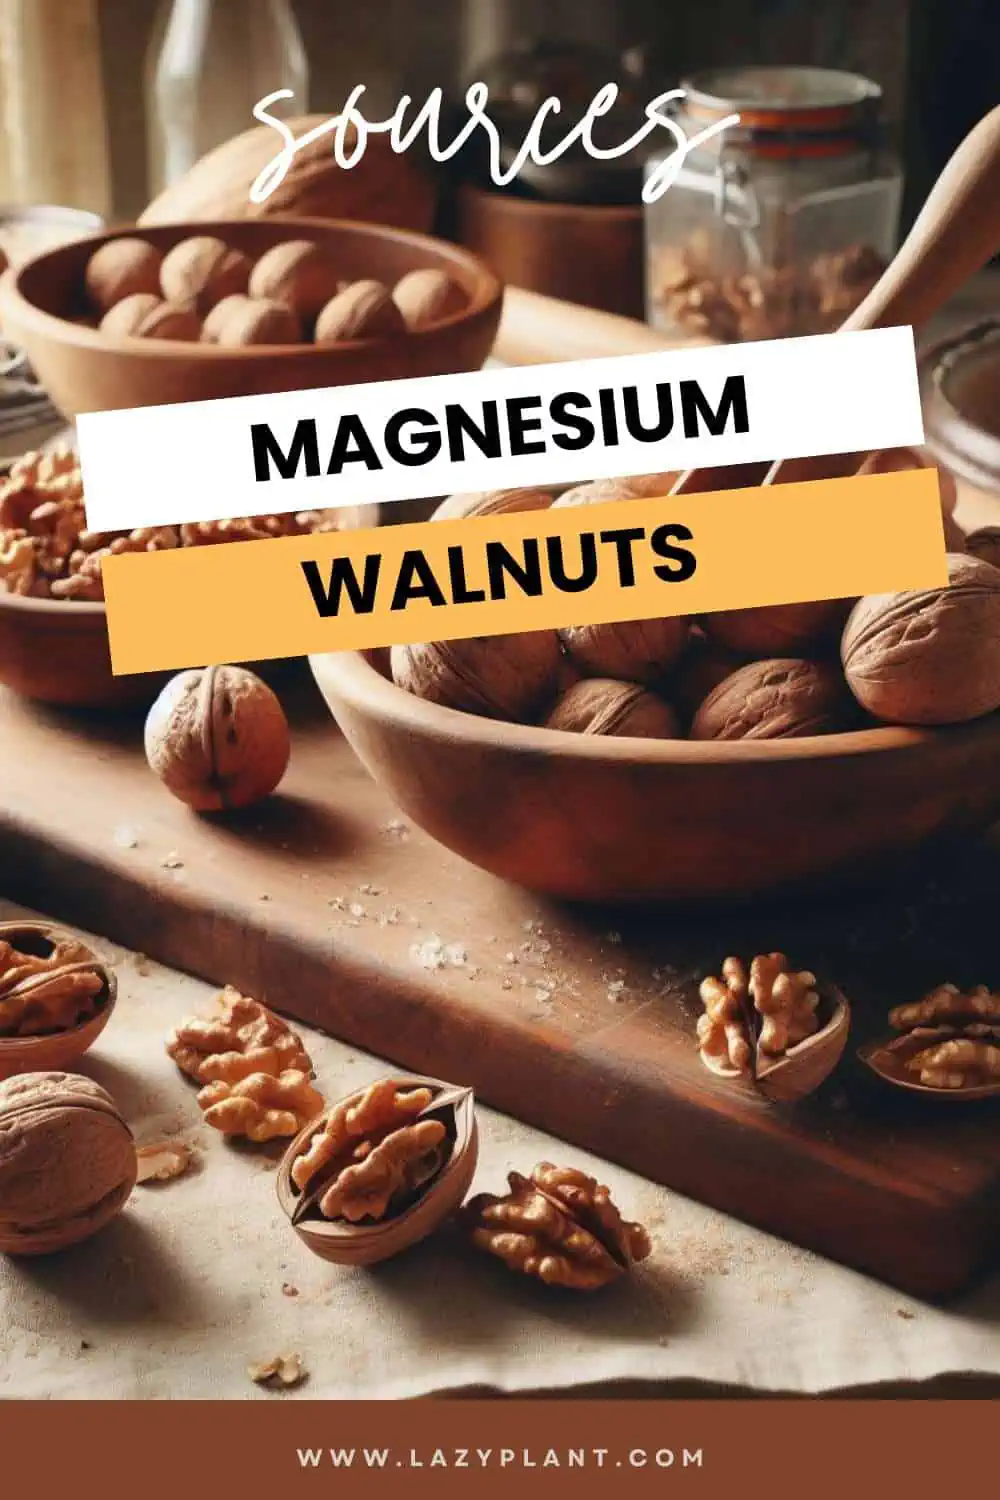 Walnuts have more magnesium than most other nuts.